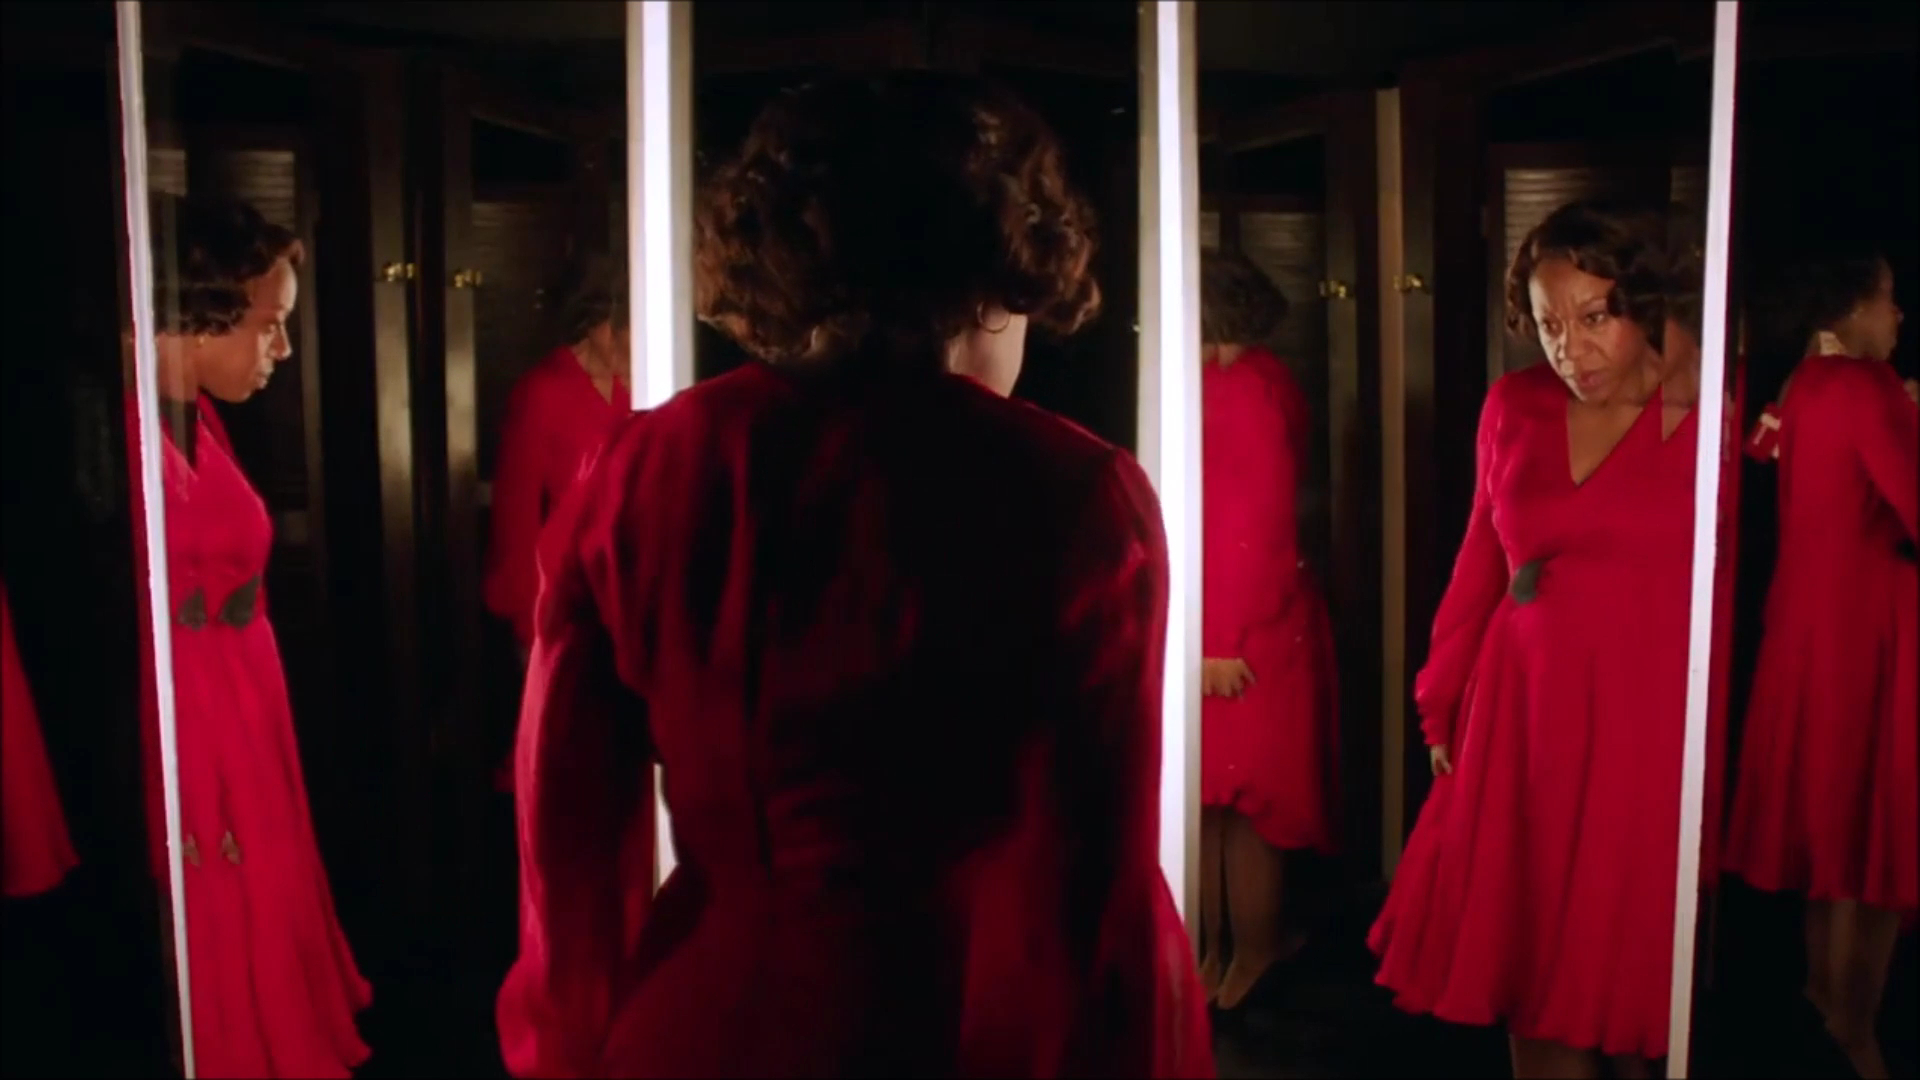 Marianne Jean-Baptiste trying on a red dress in front of multiple mirrors.